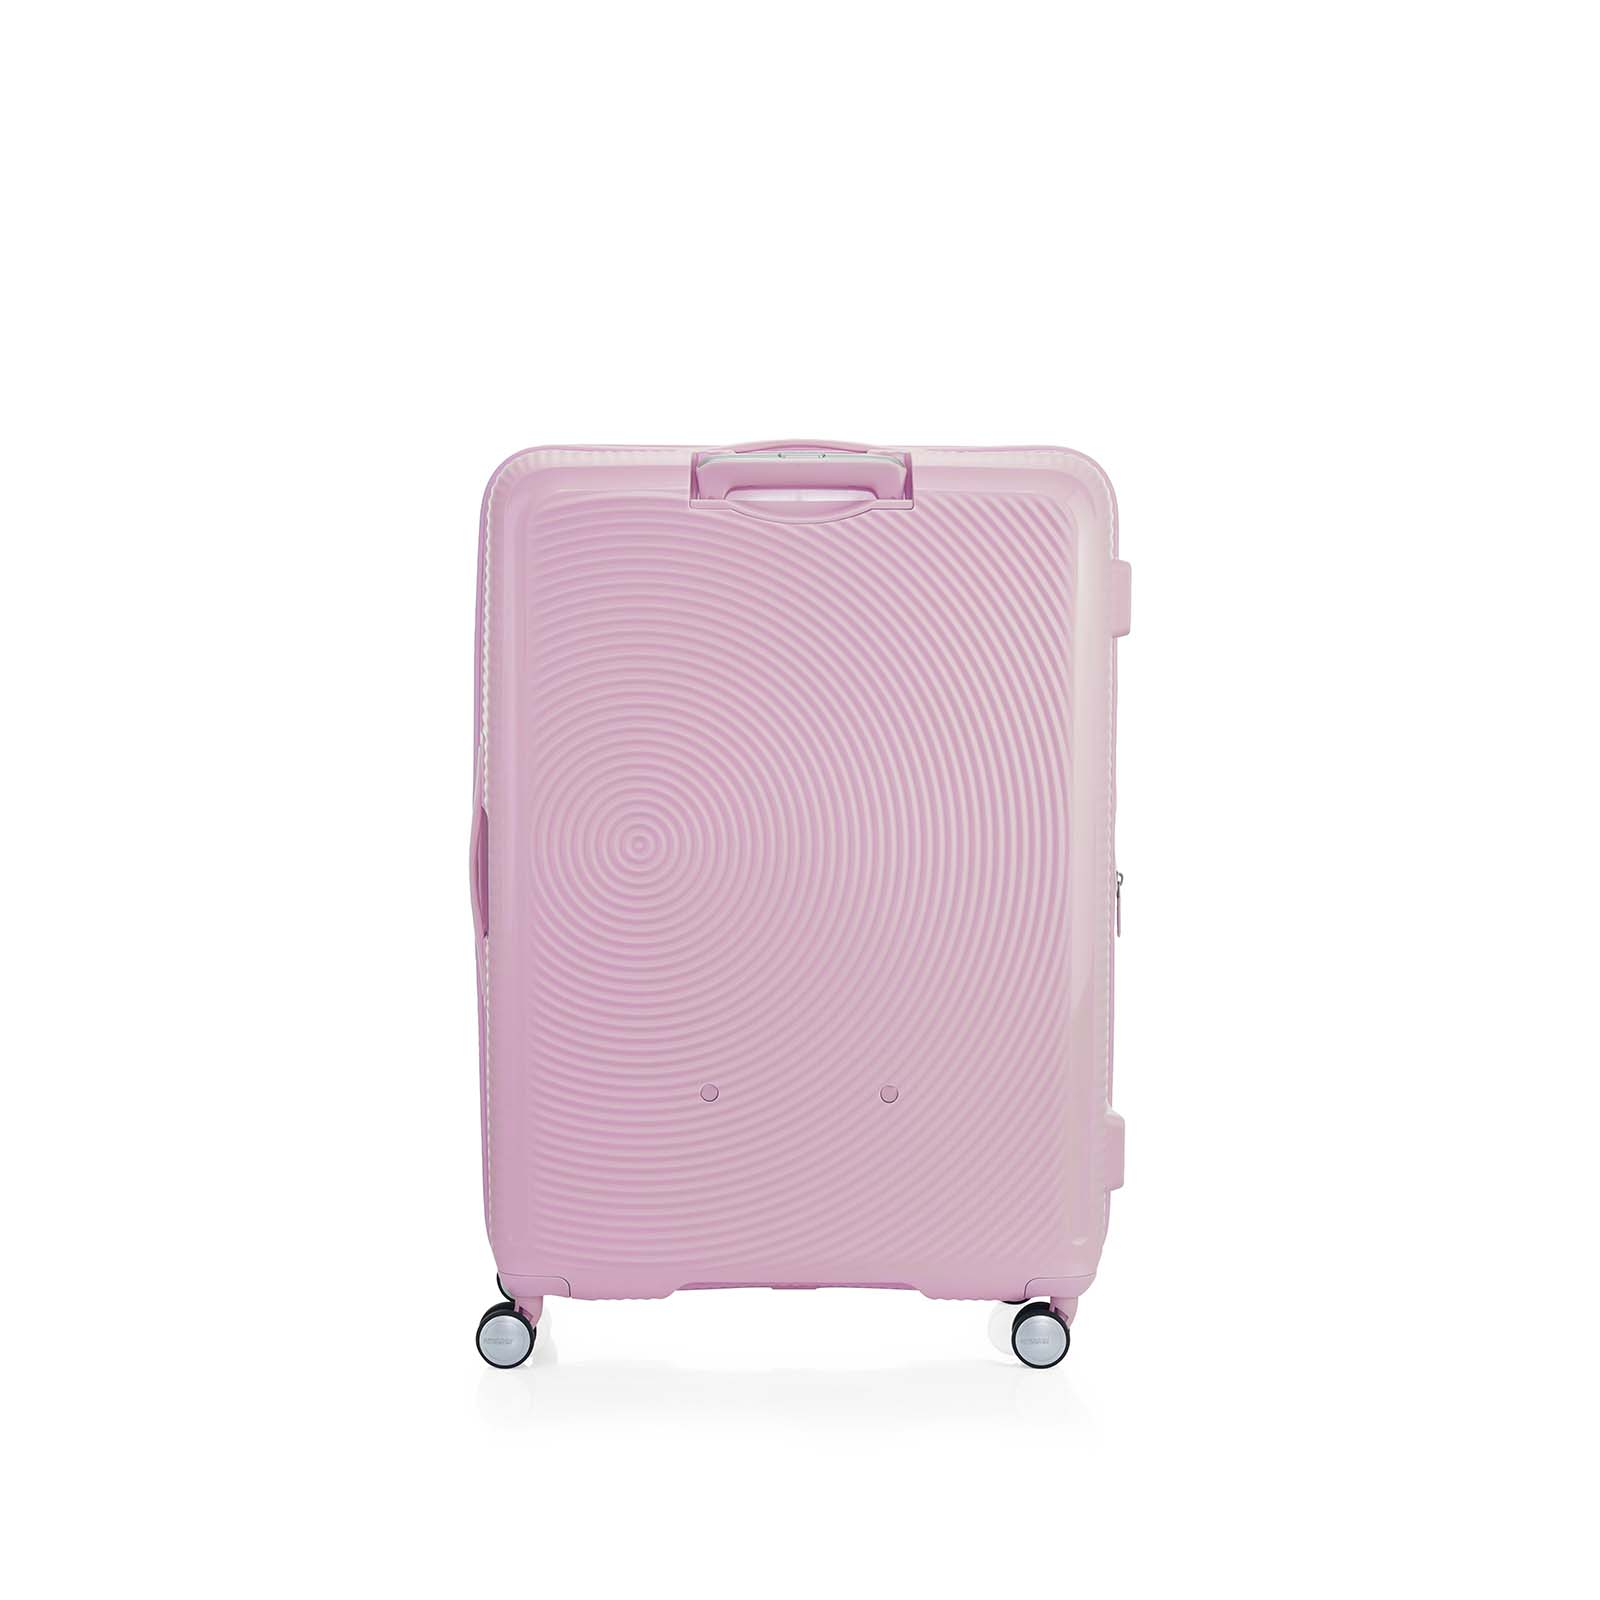 American-Tourister-Curio-2-80cm-Suitcase-Fresh-Pink-Back